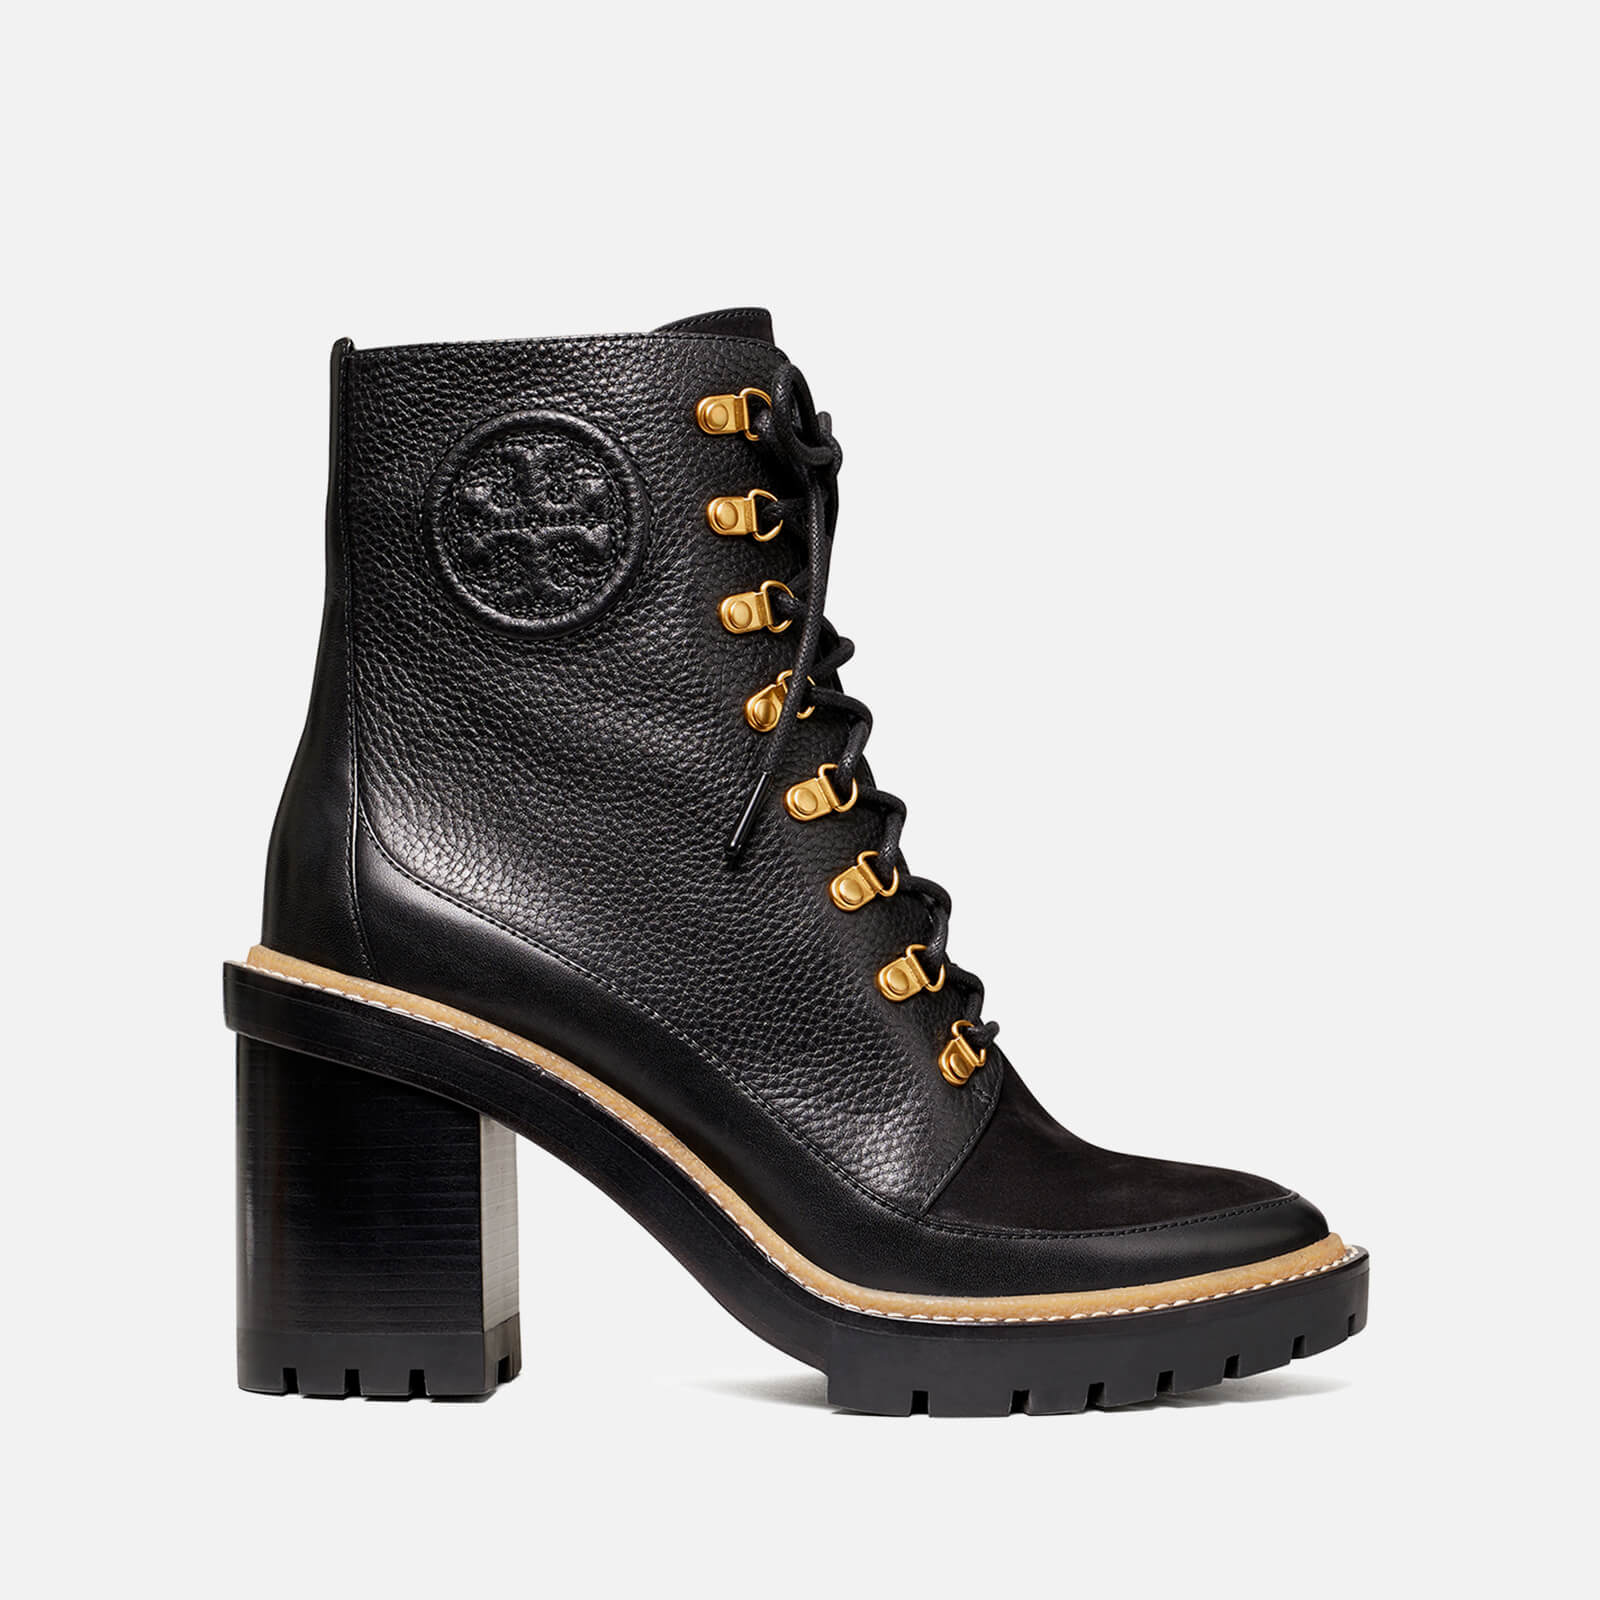 Tory Burch Miller Leather Heeled Ankle Boots - UK 6